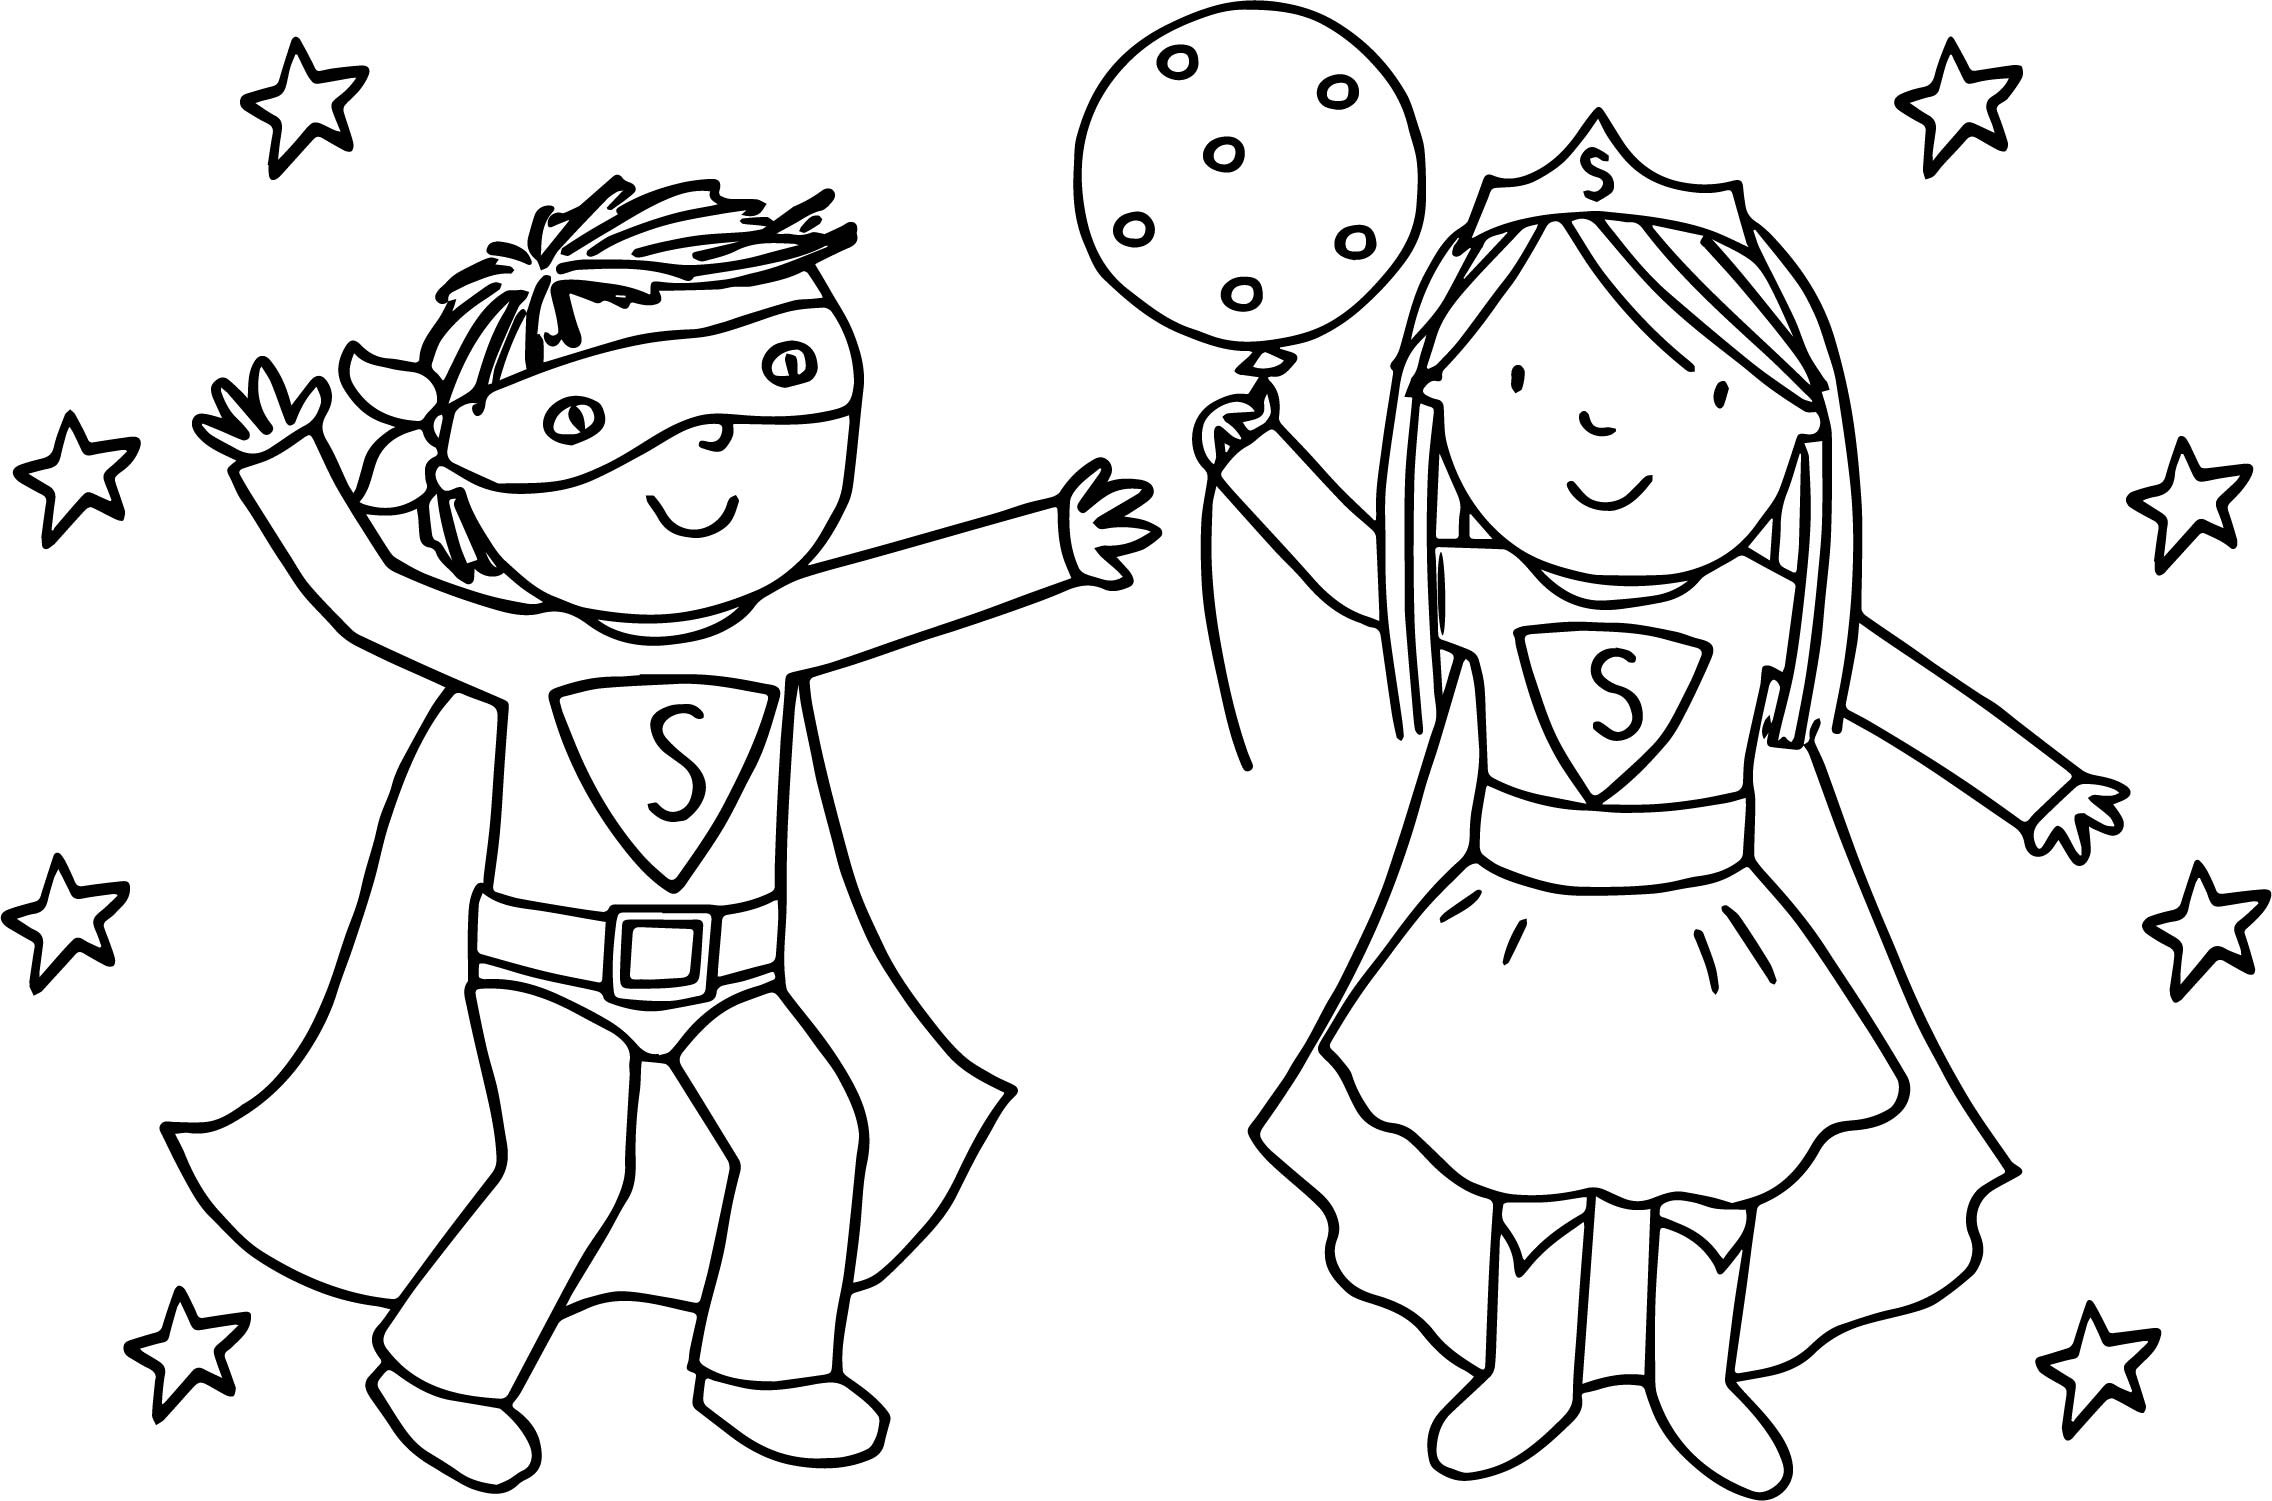 Coloring Sheets For Boys And Girls
 Boy And Girl Coloring Pages